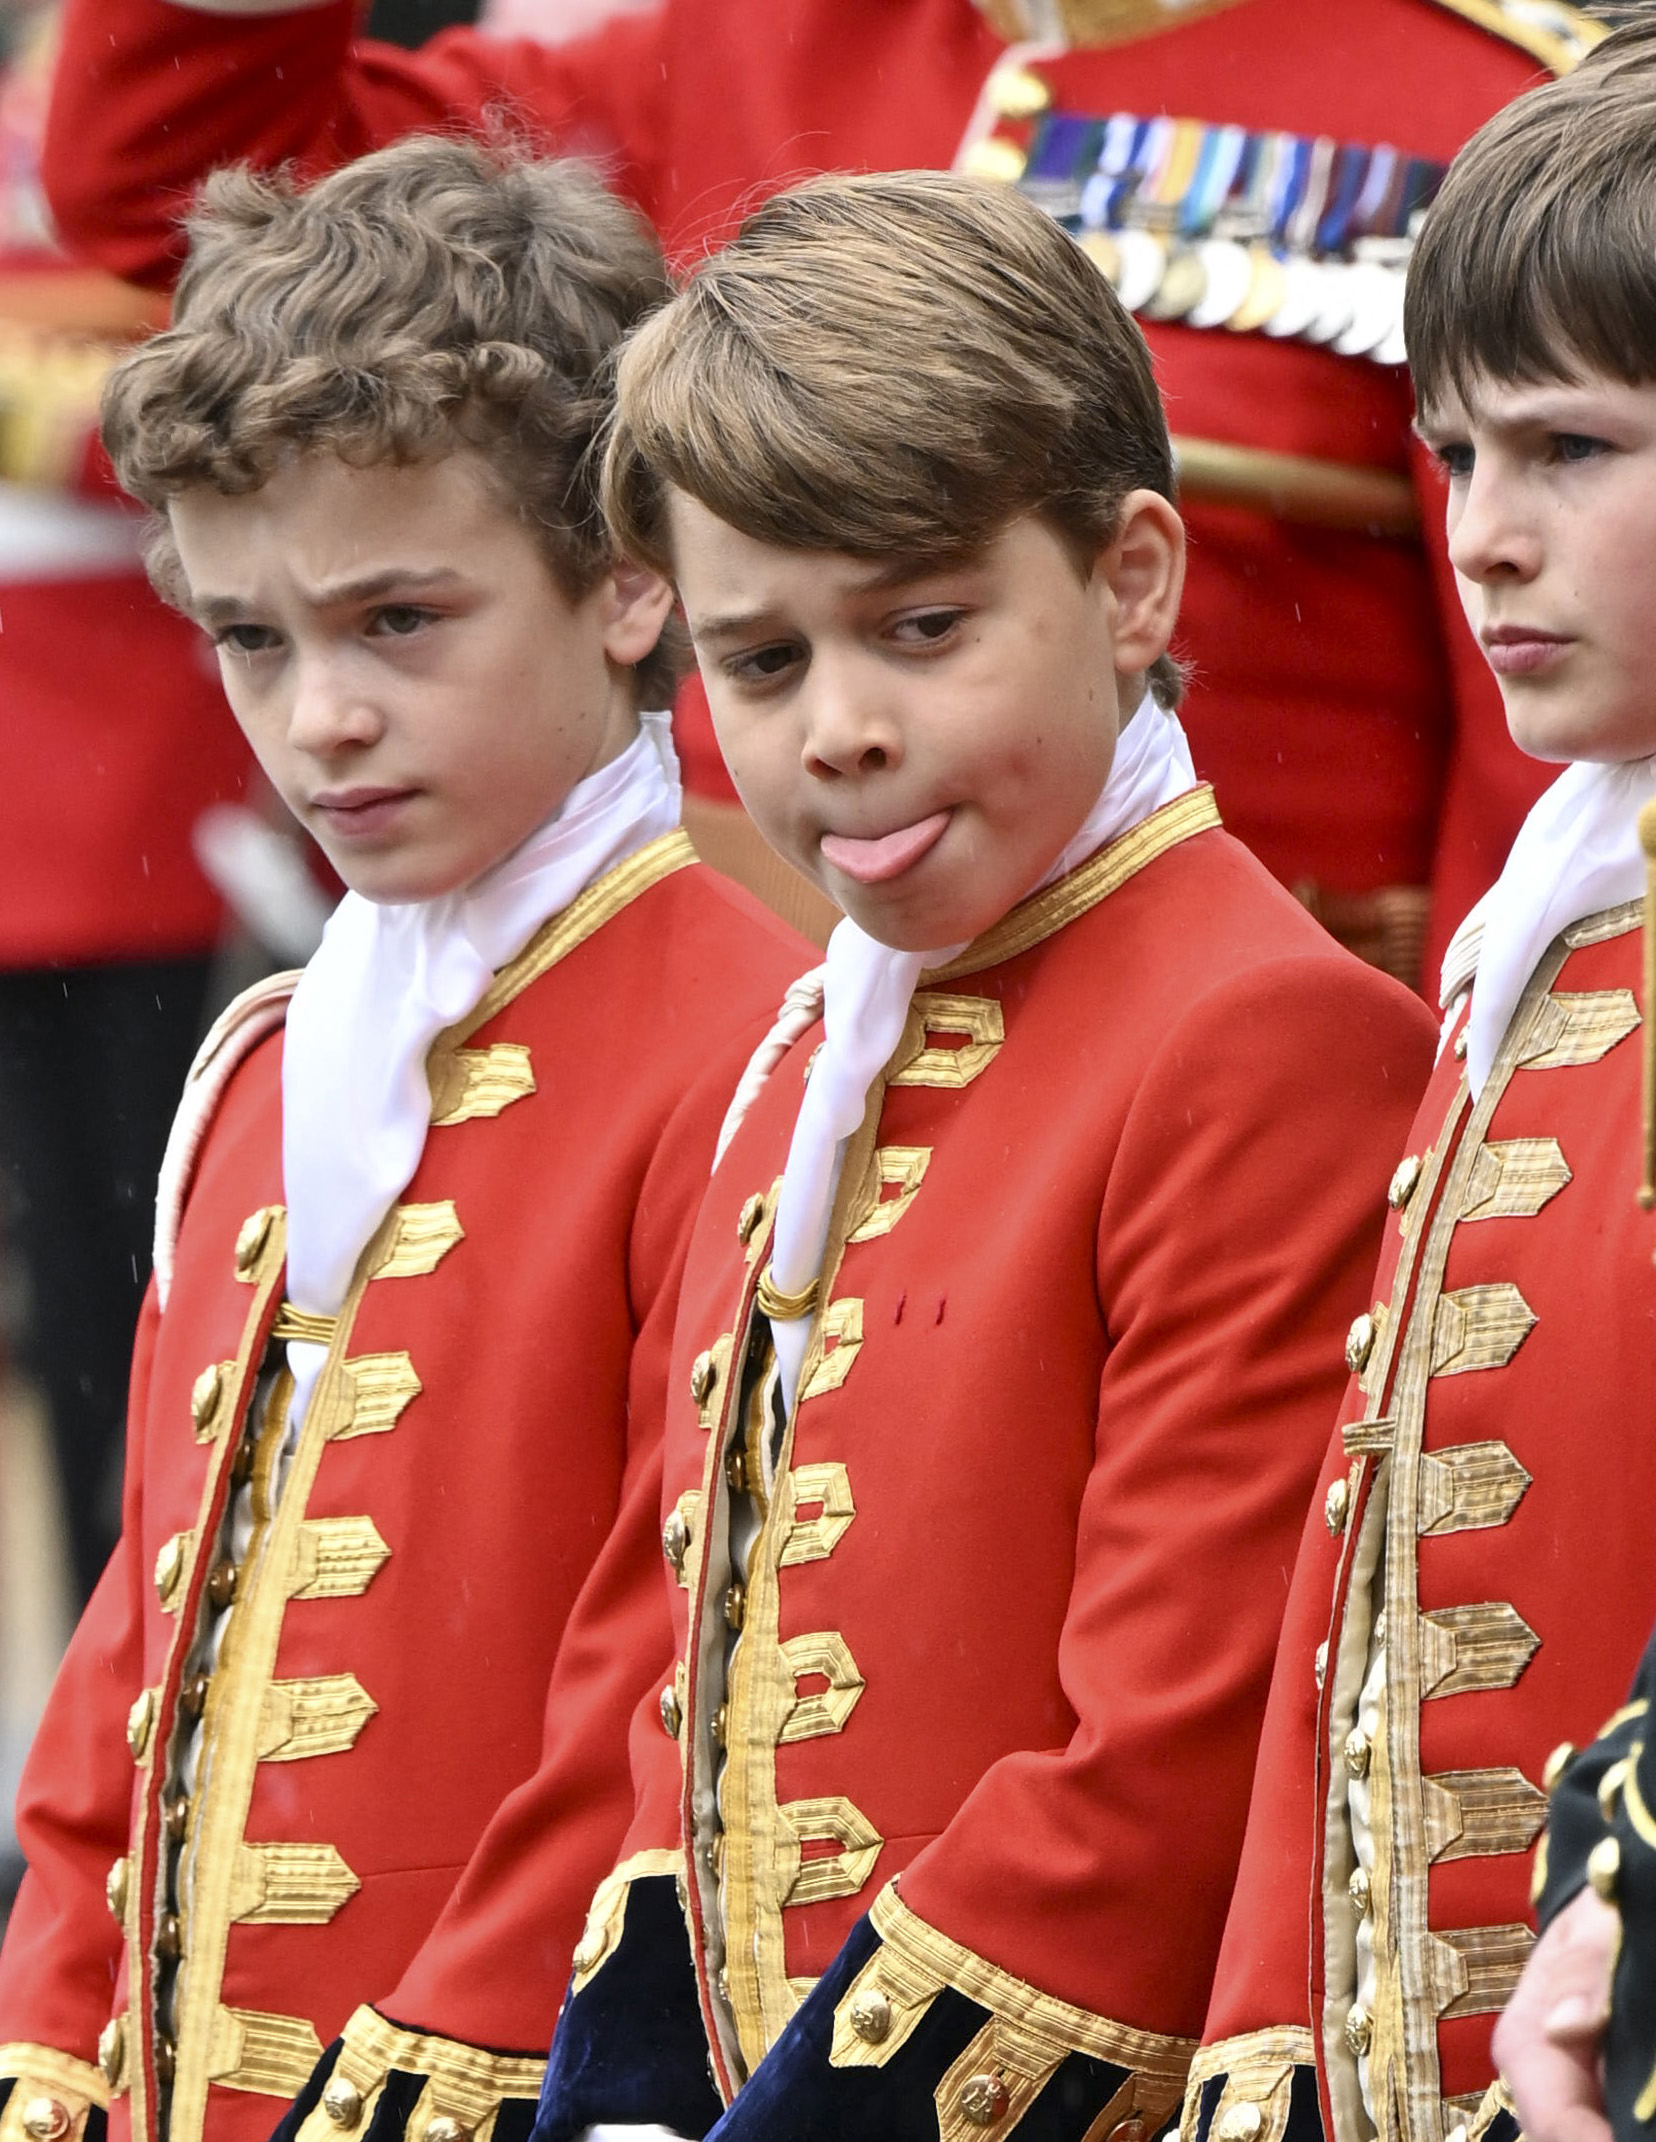 Page of Honours Ralph Tollemache, Prince George of Wales and Lord Oliver Cholmondeley at Buckingham Palace during the Coronation of King Charles III  in London in 2023 | Source: Getty Images